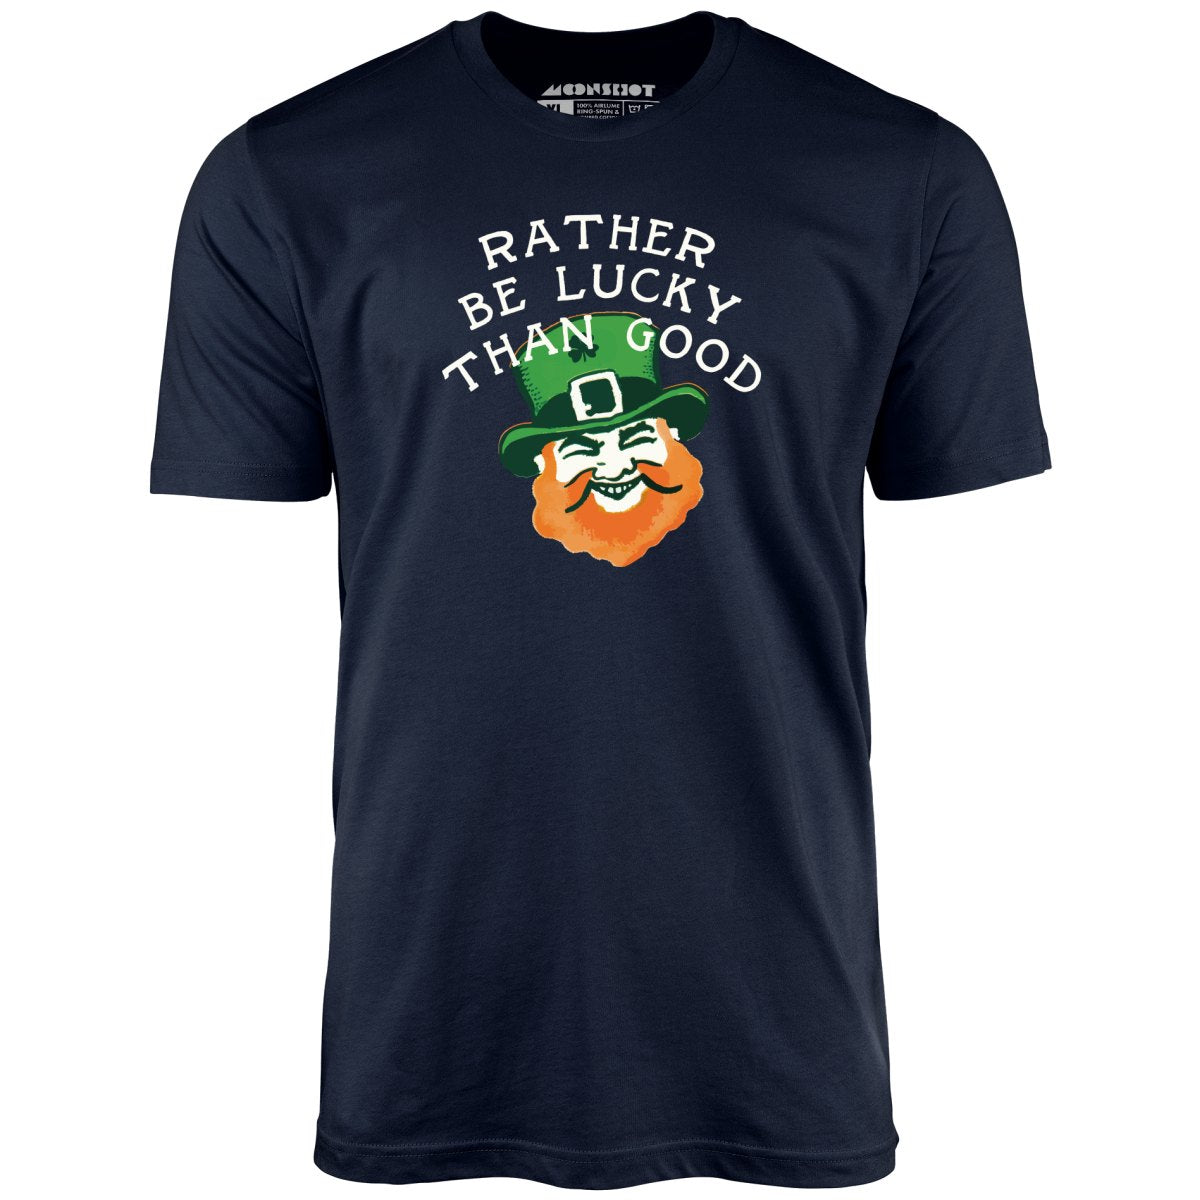 Rather Be Lucky Than Good - Unisex T-Shirt